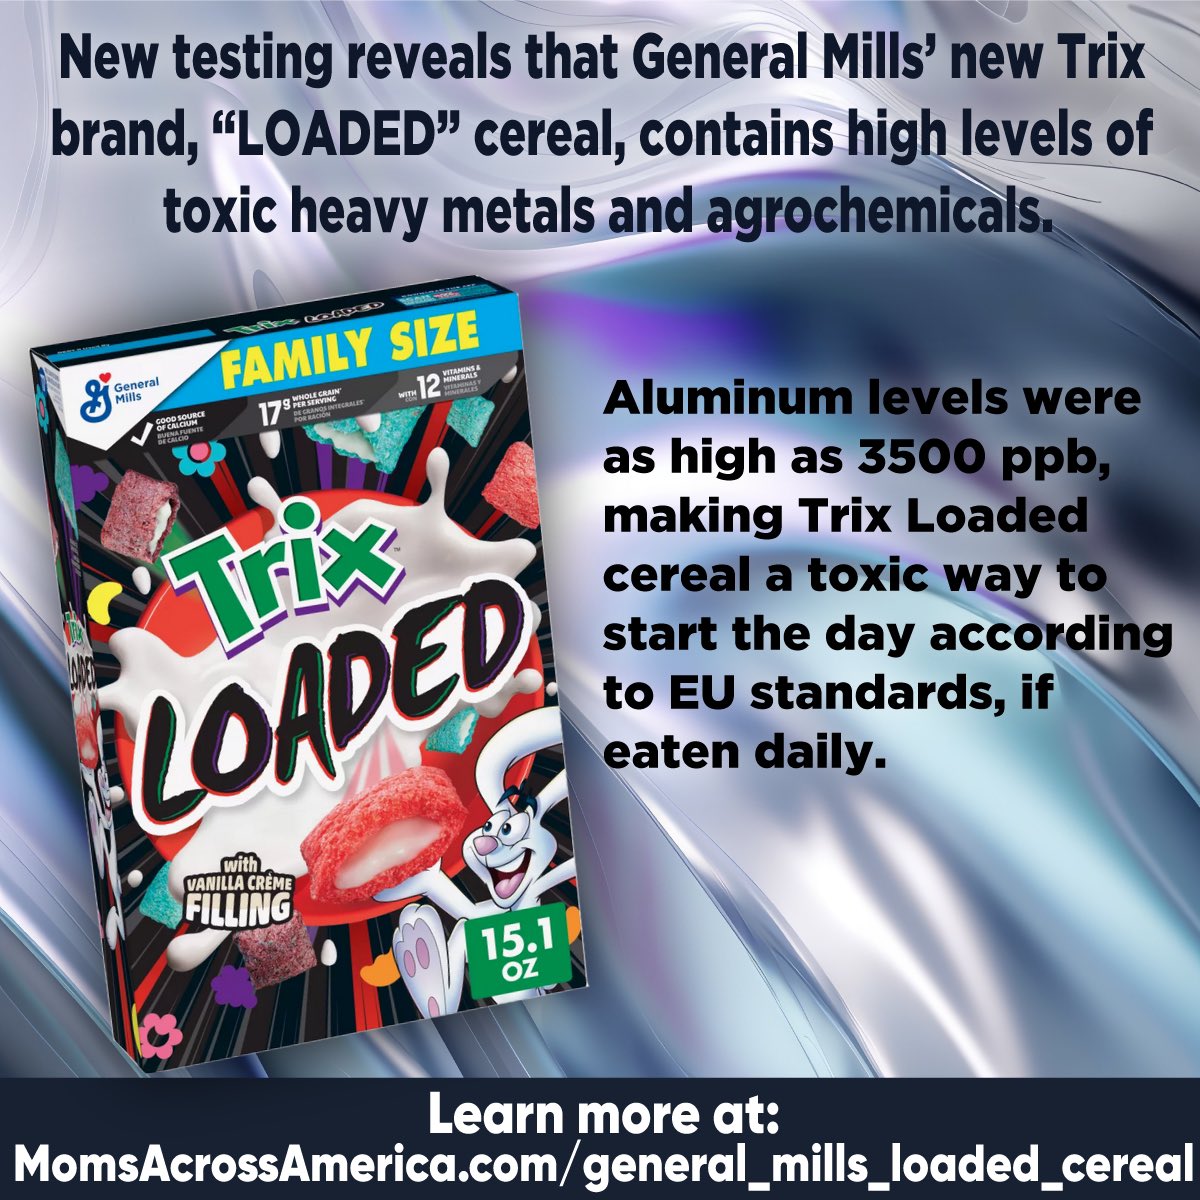 BREAKING: General Mills 'Loaded” Cereal is Loaded with Dangerous Levels of Toxins. STORY: momsacrossamerica.com/general_mills_… Please tell your elected official that we have a physical and mental health crisis in America. #generalmills #cereal #breakfast